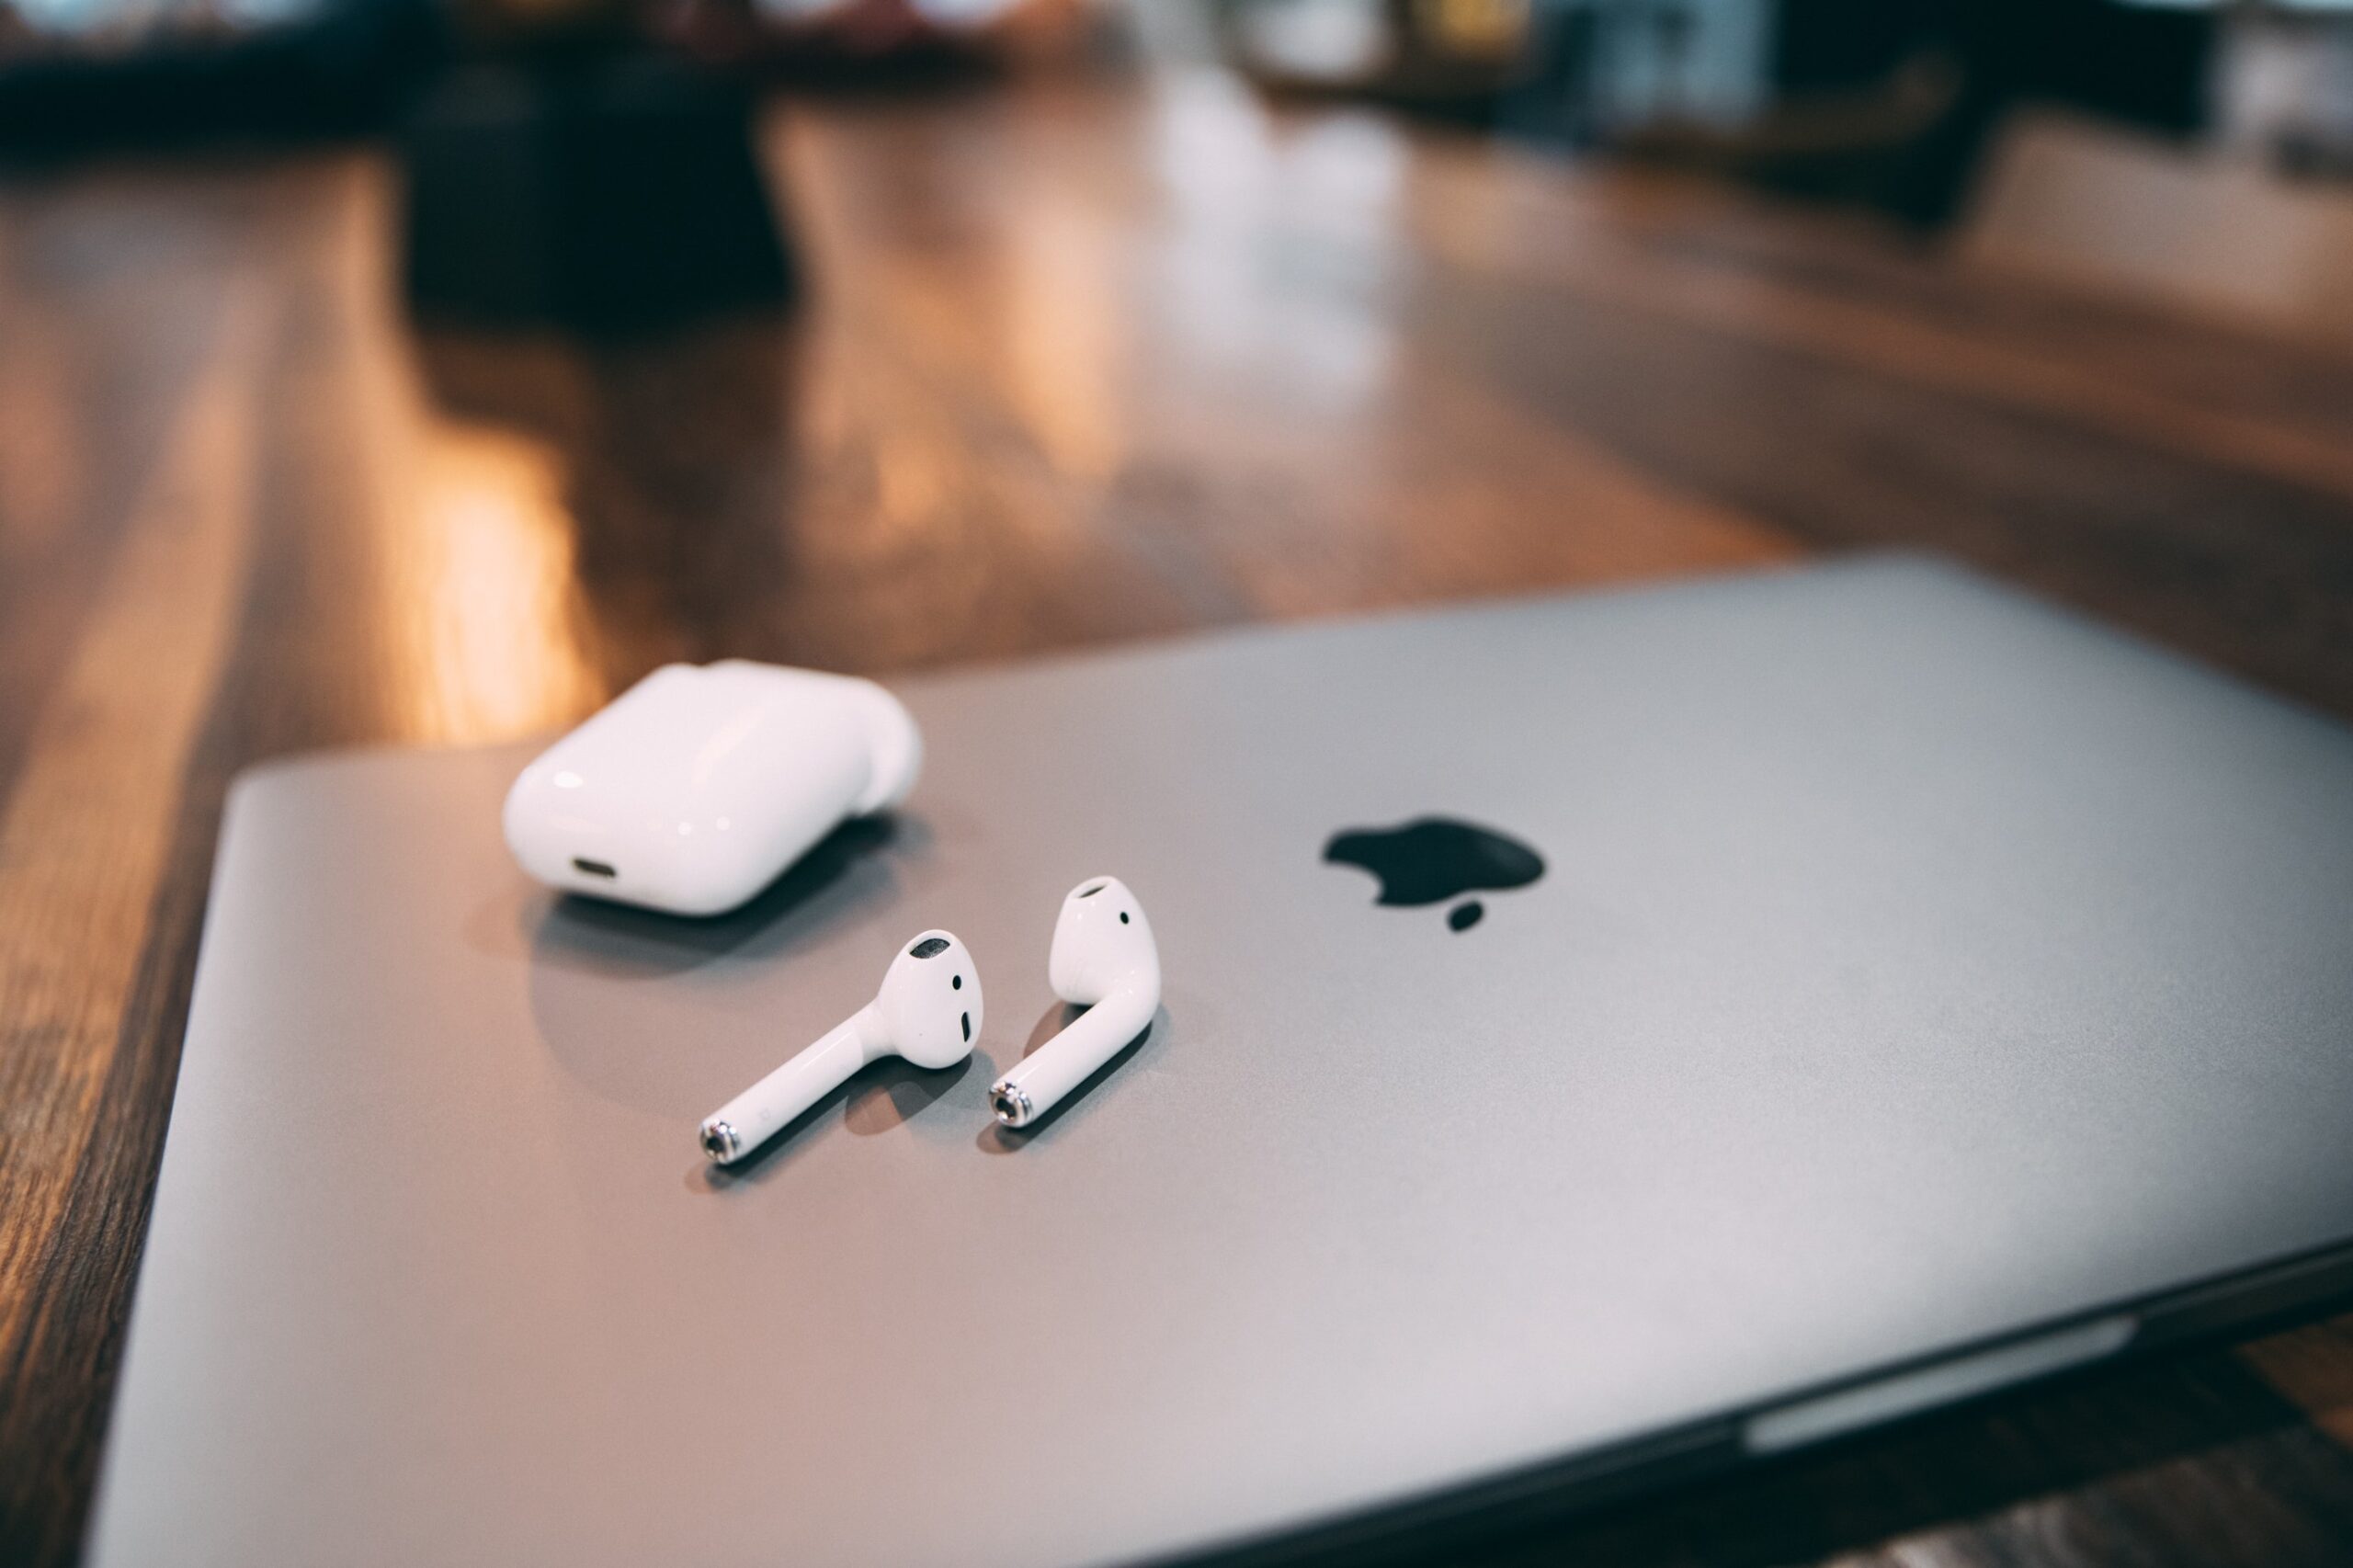 How to Connect AirPods to Mac | Full Guide and Troubleshooting